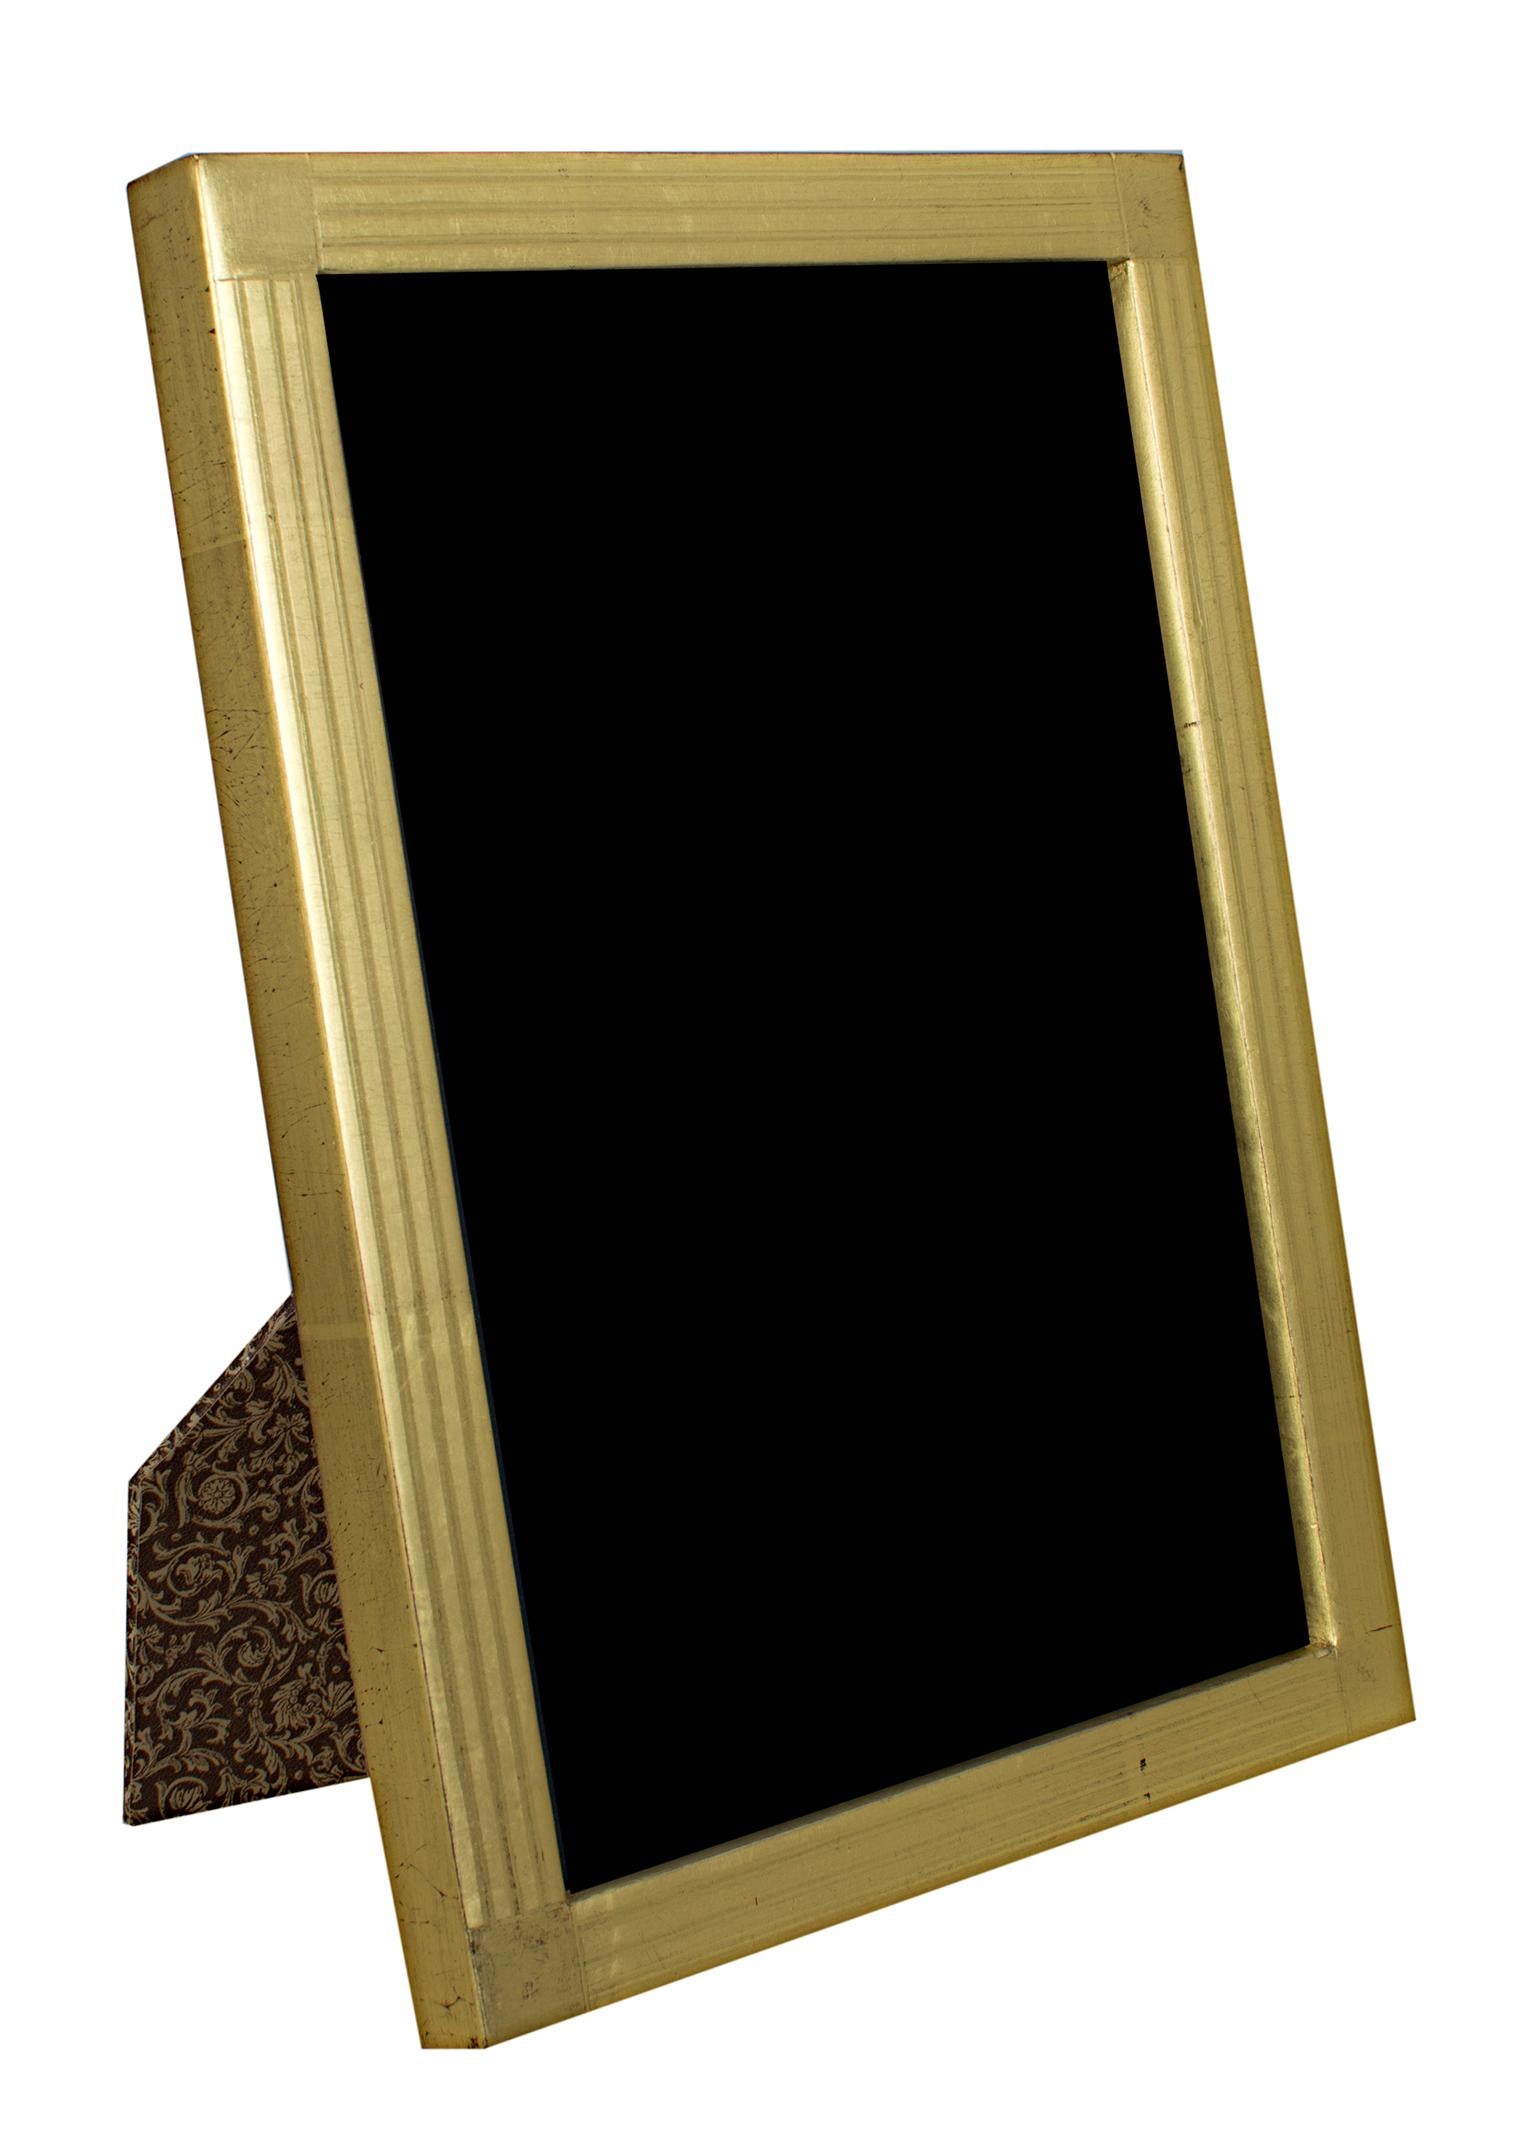 "Handmade 22K Gold Leaf Photo Frame, " Wood 5 x 7 Frame created in Romania - Art by Unknown